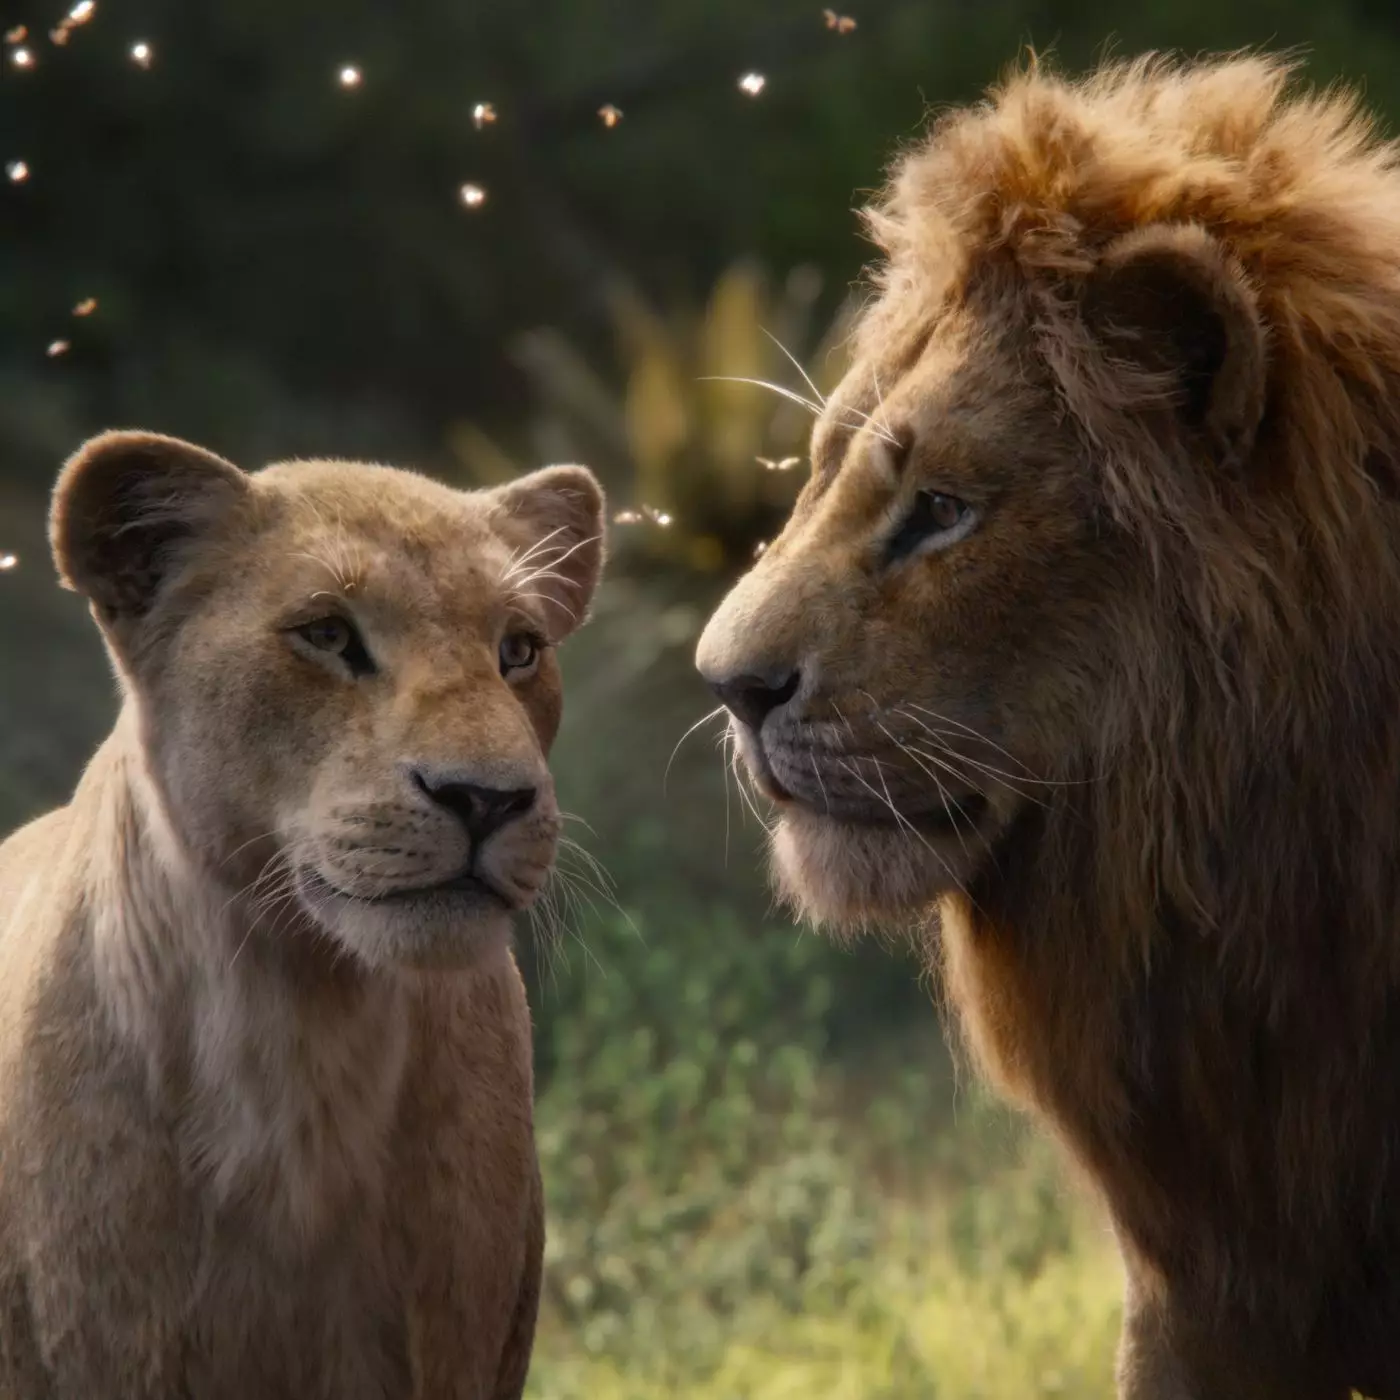 A sequel to the live-action remake of 'The Lion King' is in the works (